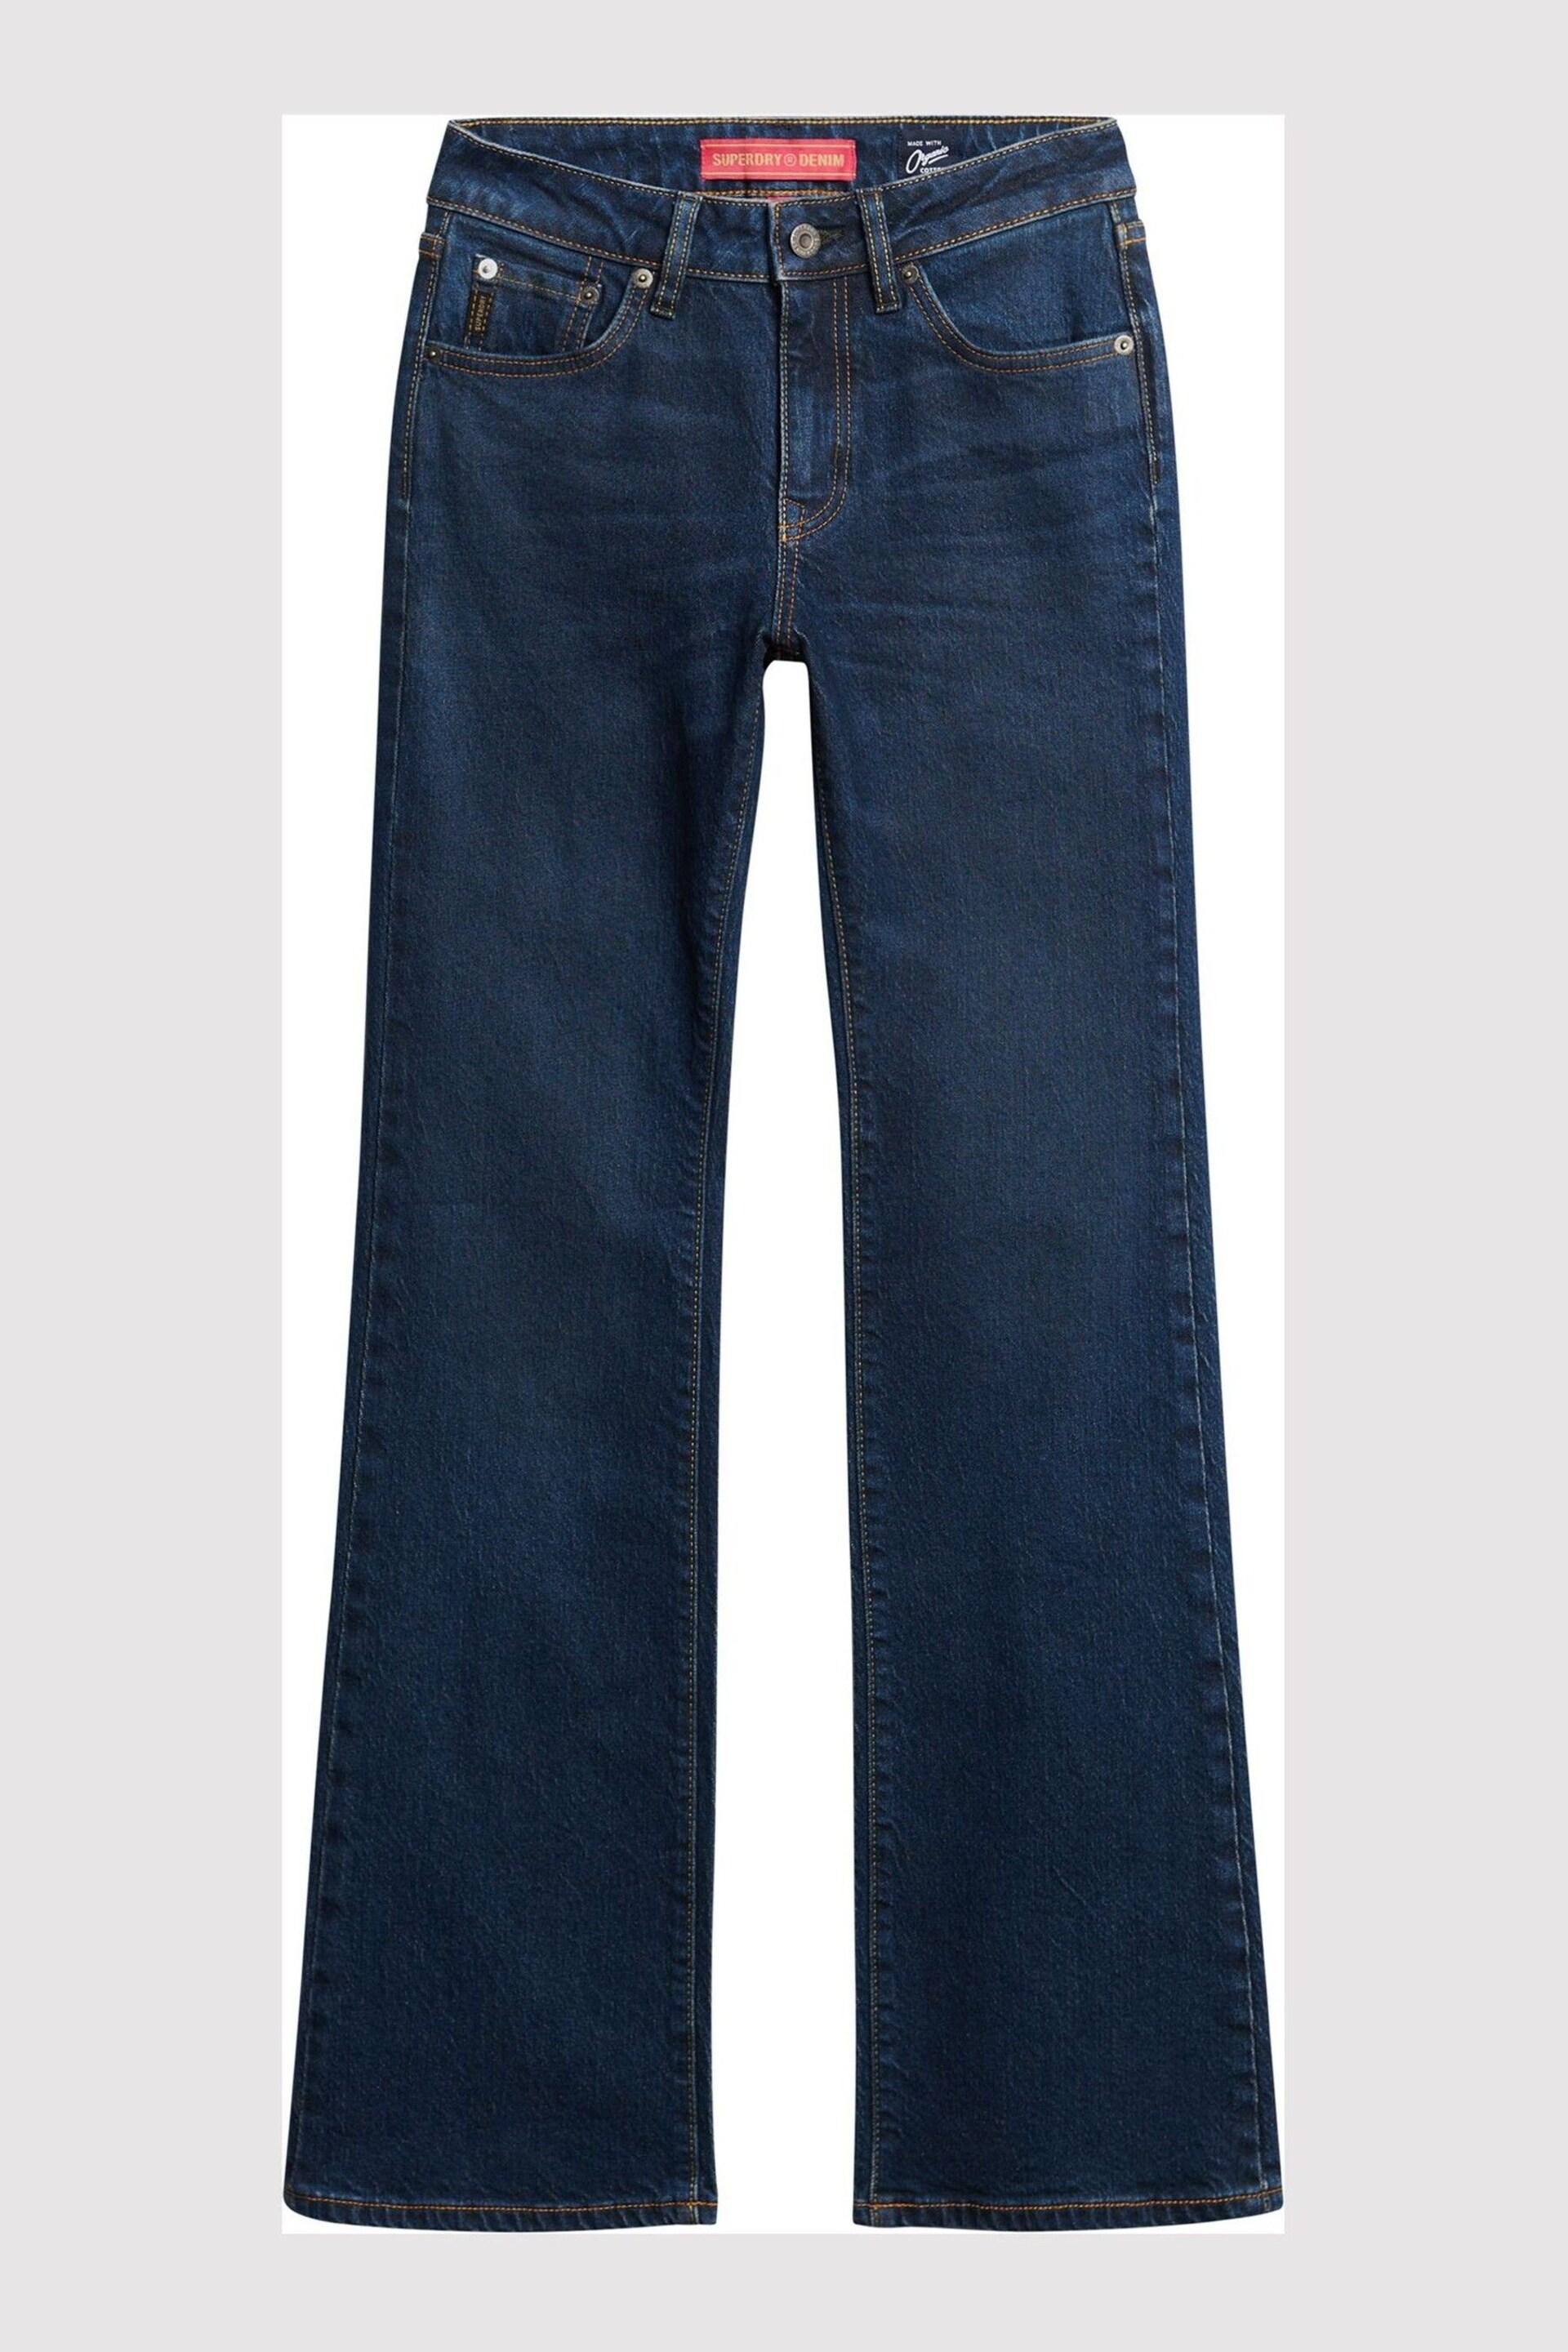 Superdry Blue Mid Rise Slim Flare Jeans - Image 4 of 8